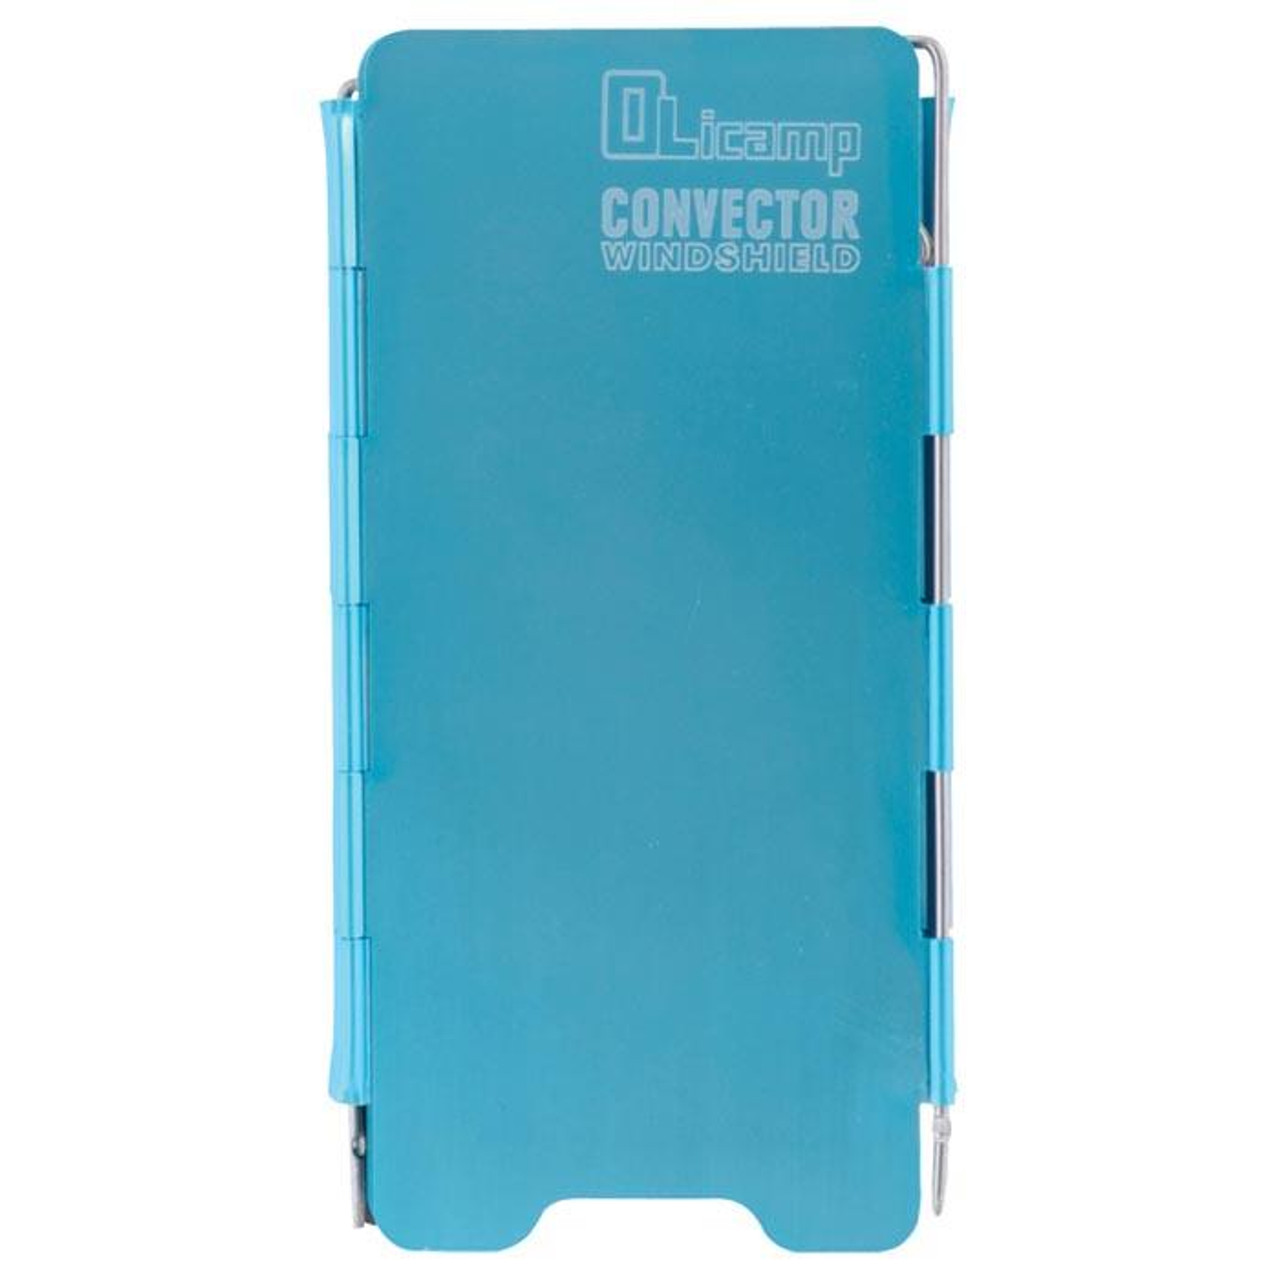 Olicamp CONVECTOR WINDSHIELD Blue 5.5" x 2.758